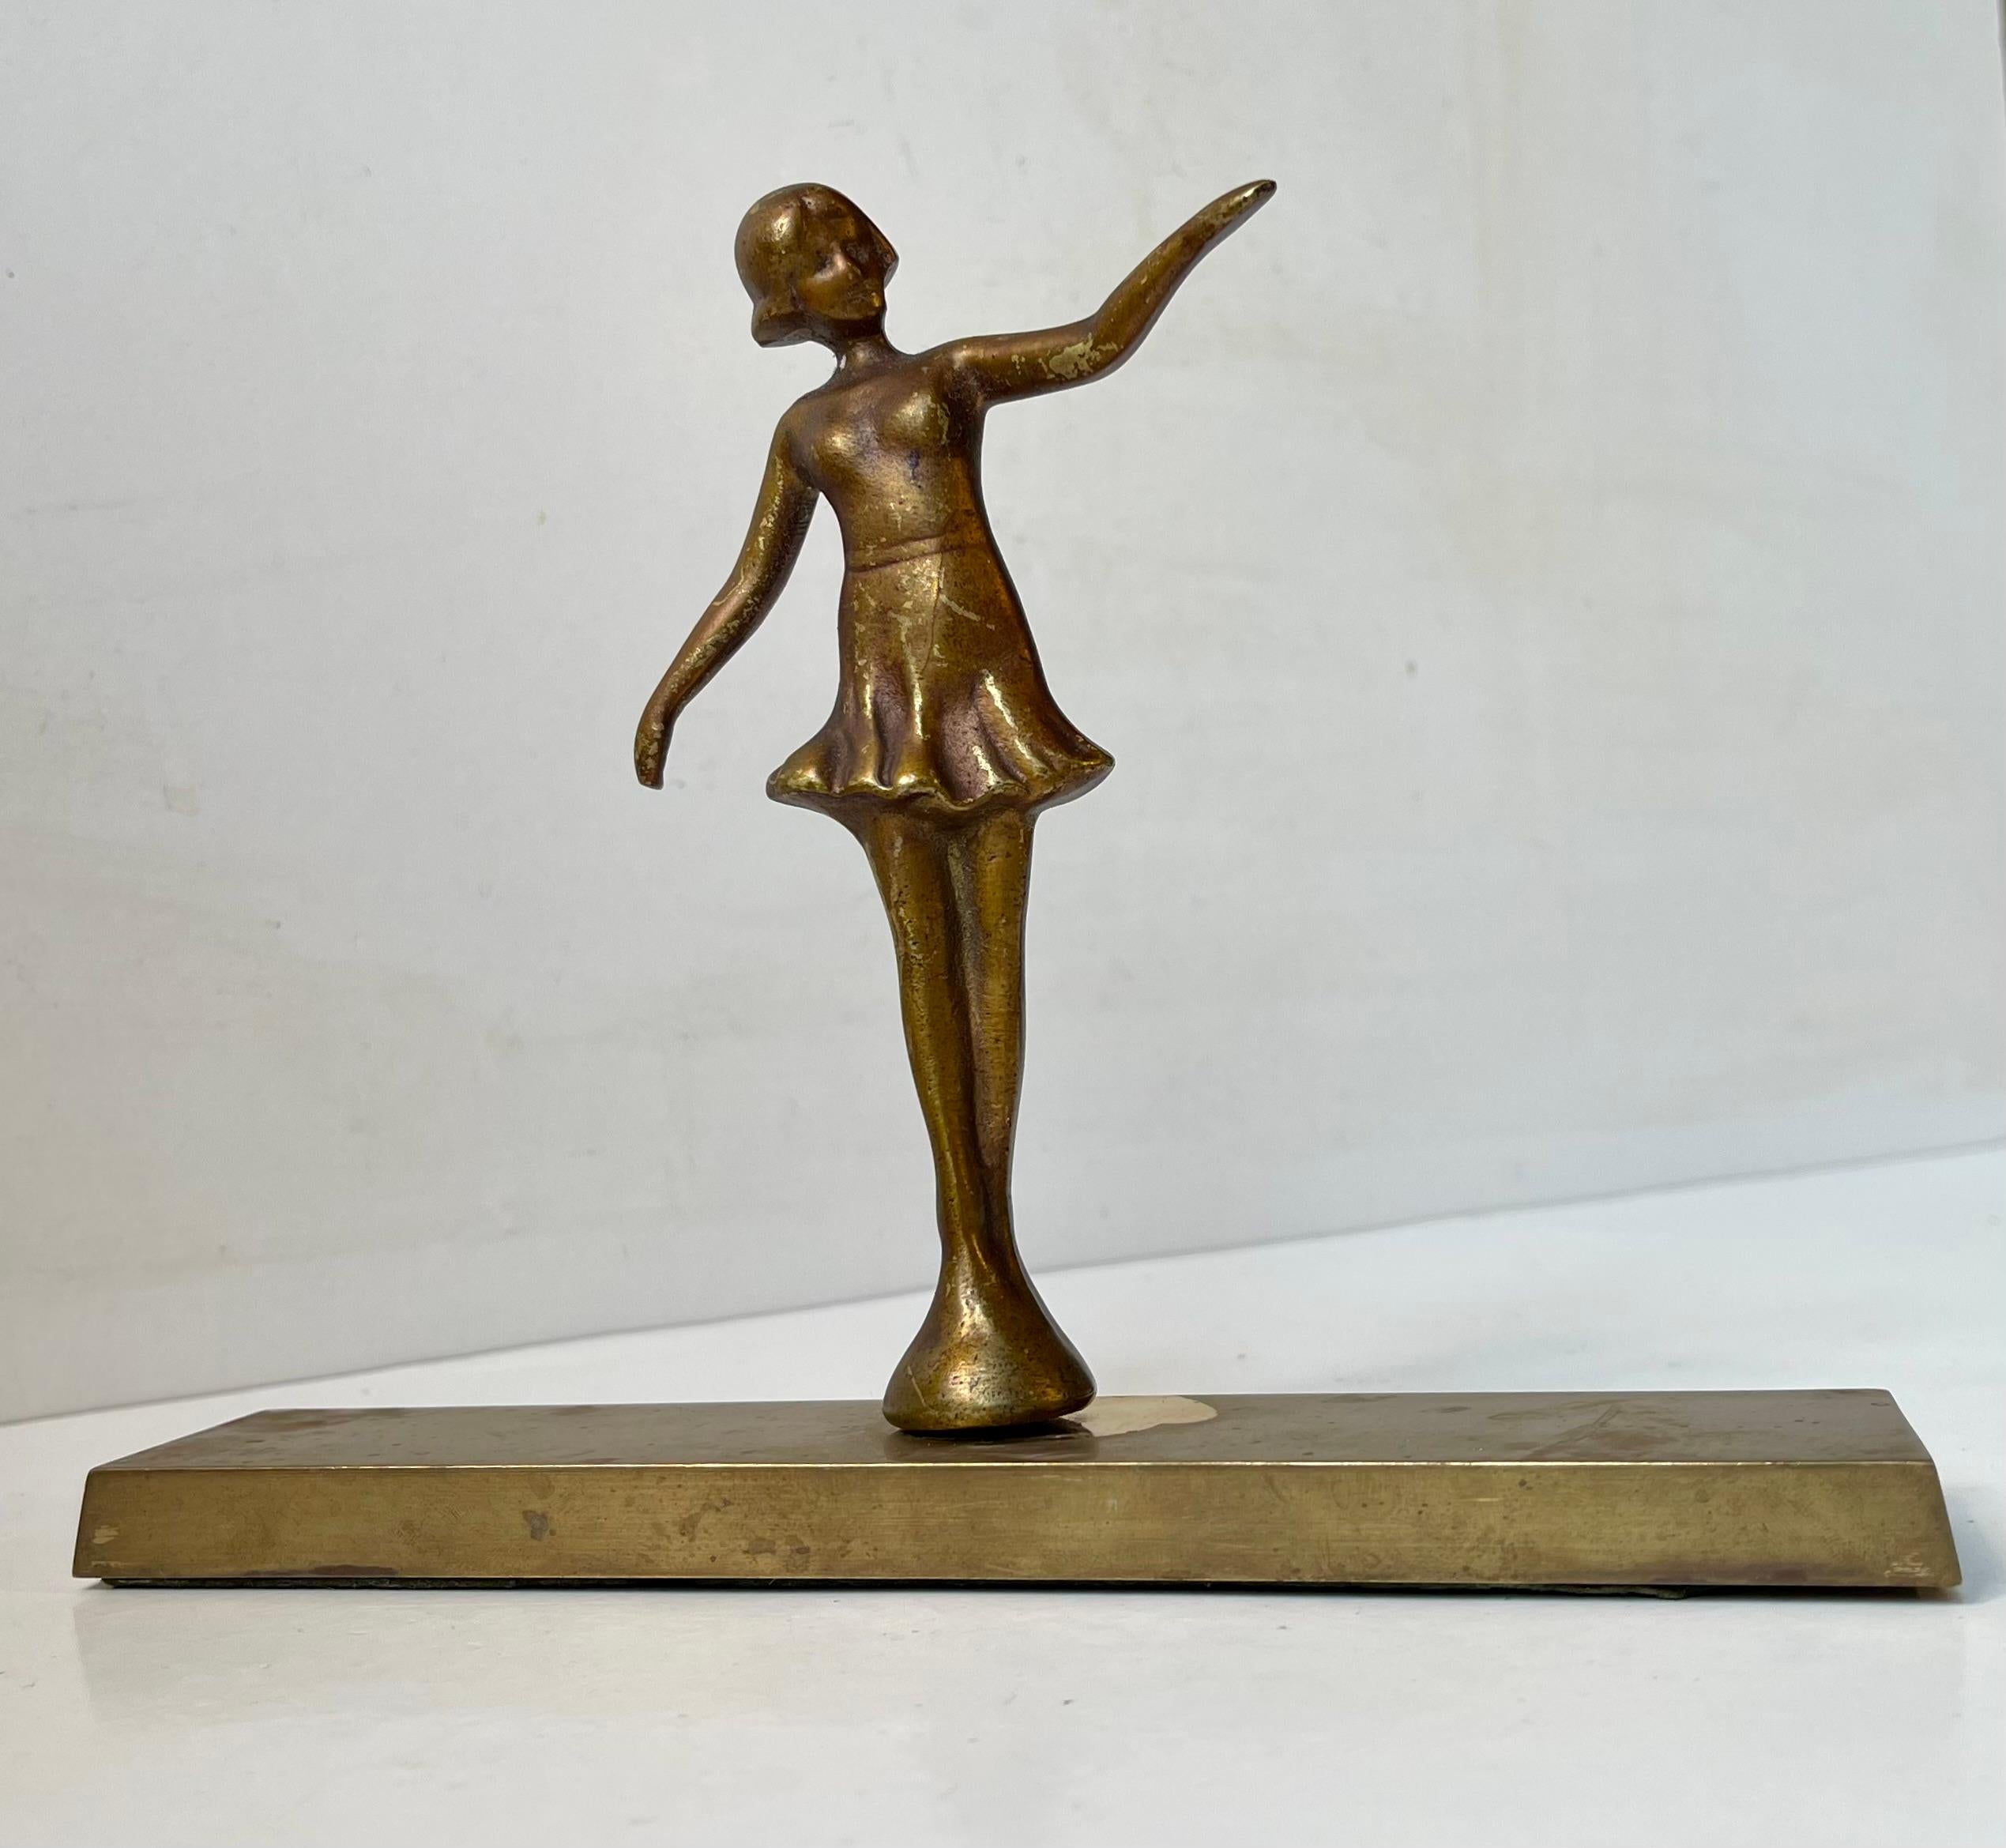 A small desk sculpture or paperweight executed in patinated bronze. Given as a 40 year anniversary gift in 1949 (dated 1909-49). Danish made. Measurements: H: 16 cm, base: 19.5x4 cm.